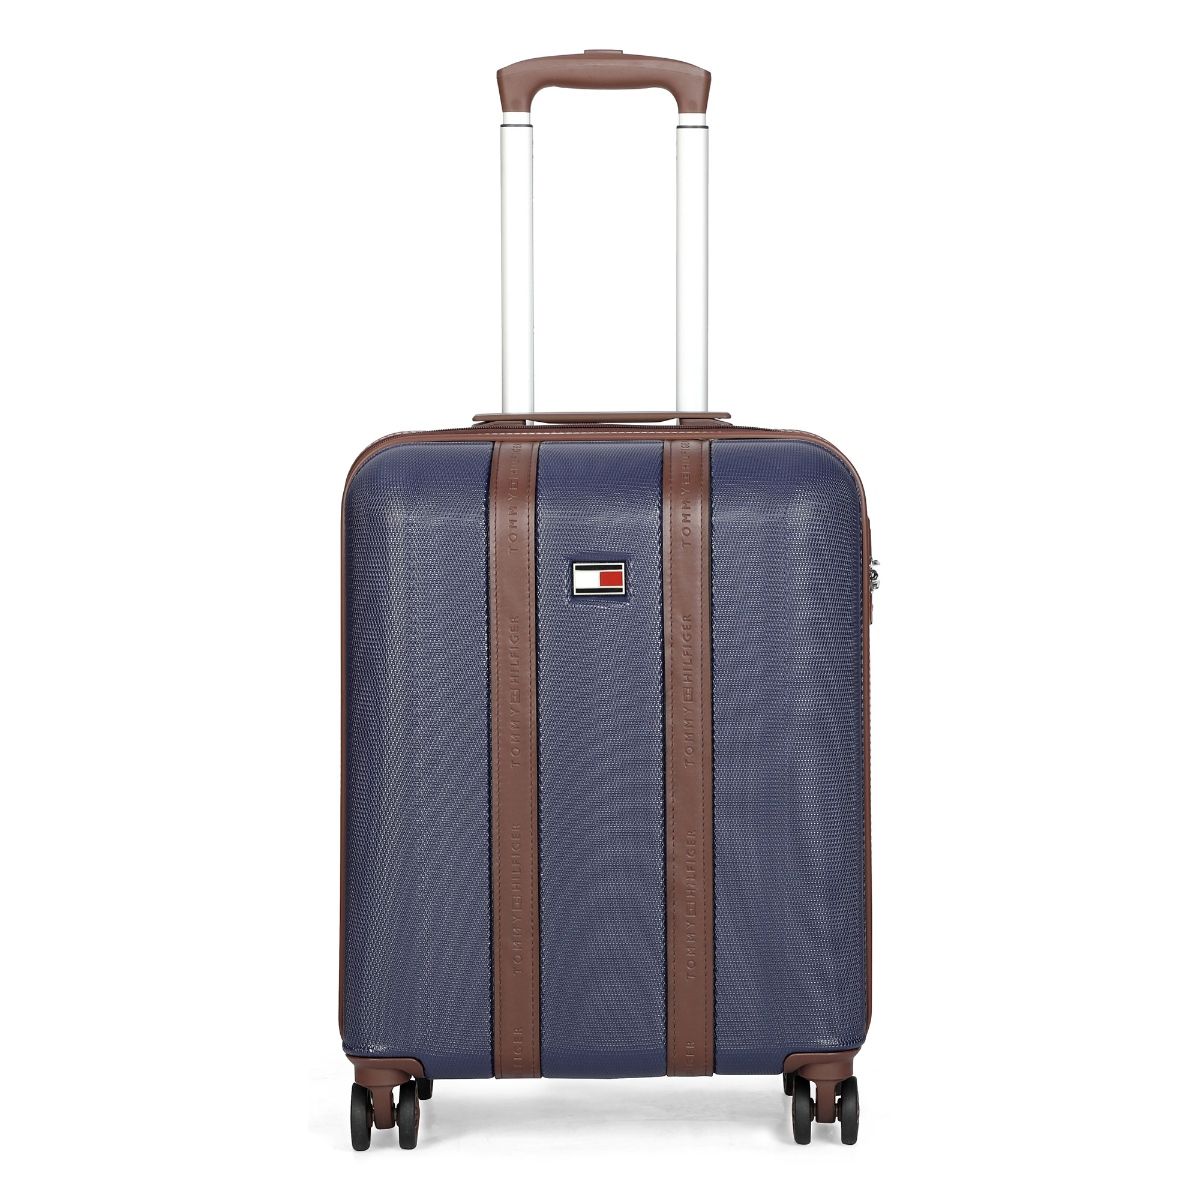 Tommy Hilfiger Luggage  Travel Bags  Buy Tommy Hilfiger Color Striped  Triton Plus Hard Luggage Navy Red White Online  Nykaa Fashion